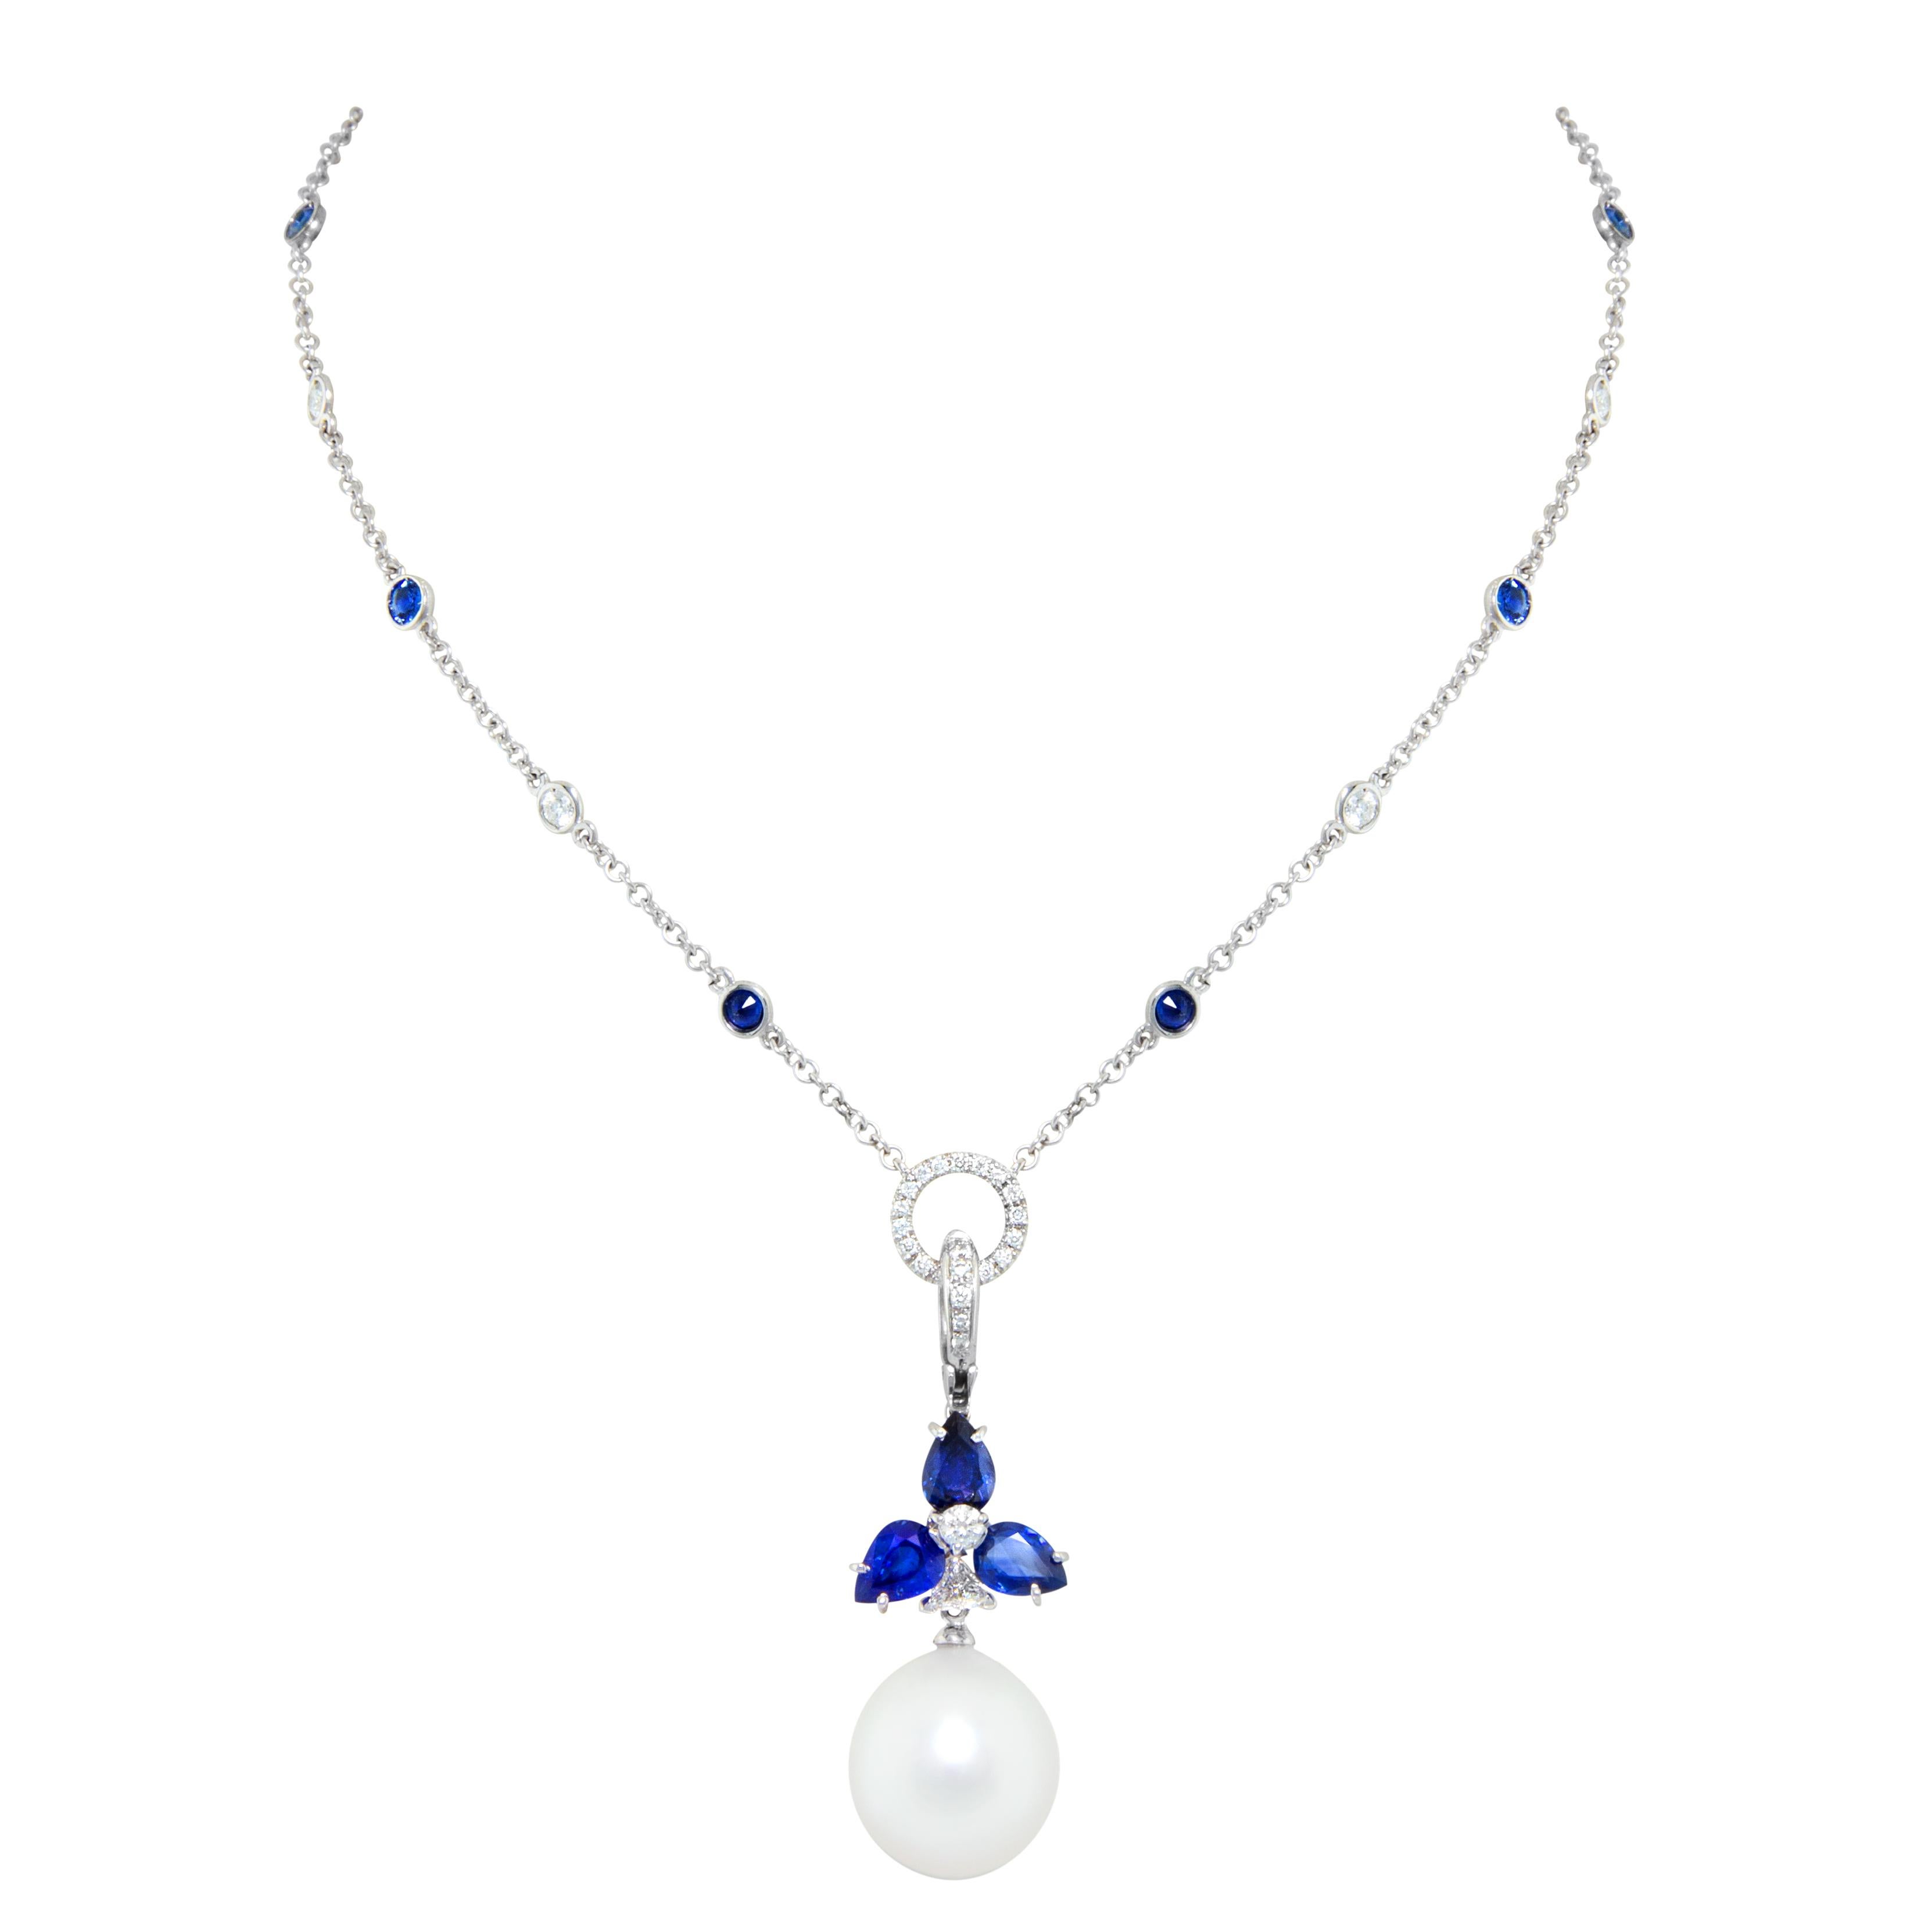 The blue sapphire pendant features a flower set with 4.20 carats of drop shape faceted blue sapphires suspending a lustrous Australian South Sea pearl of 17mm diameter by means of a triangle-cut diamond. The total weight of diamonds in the pendant